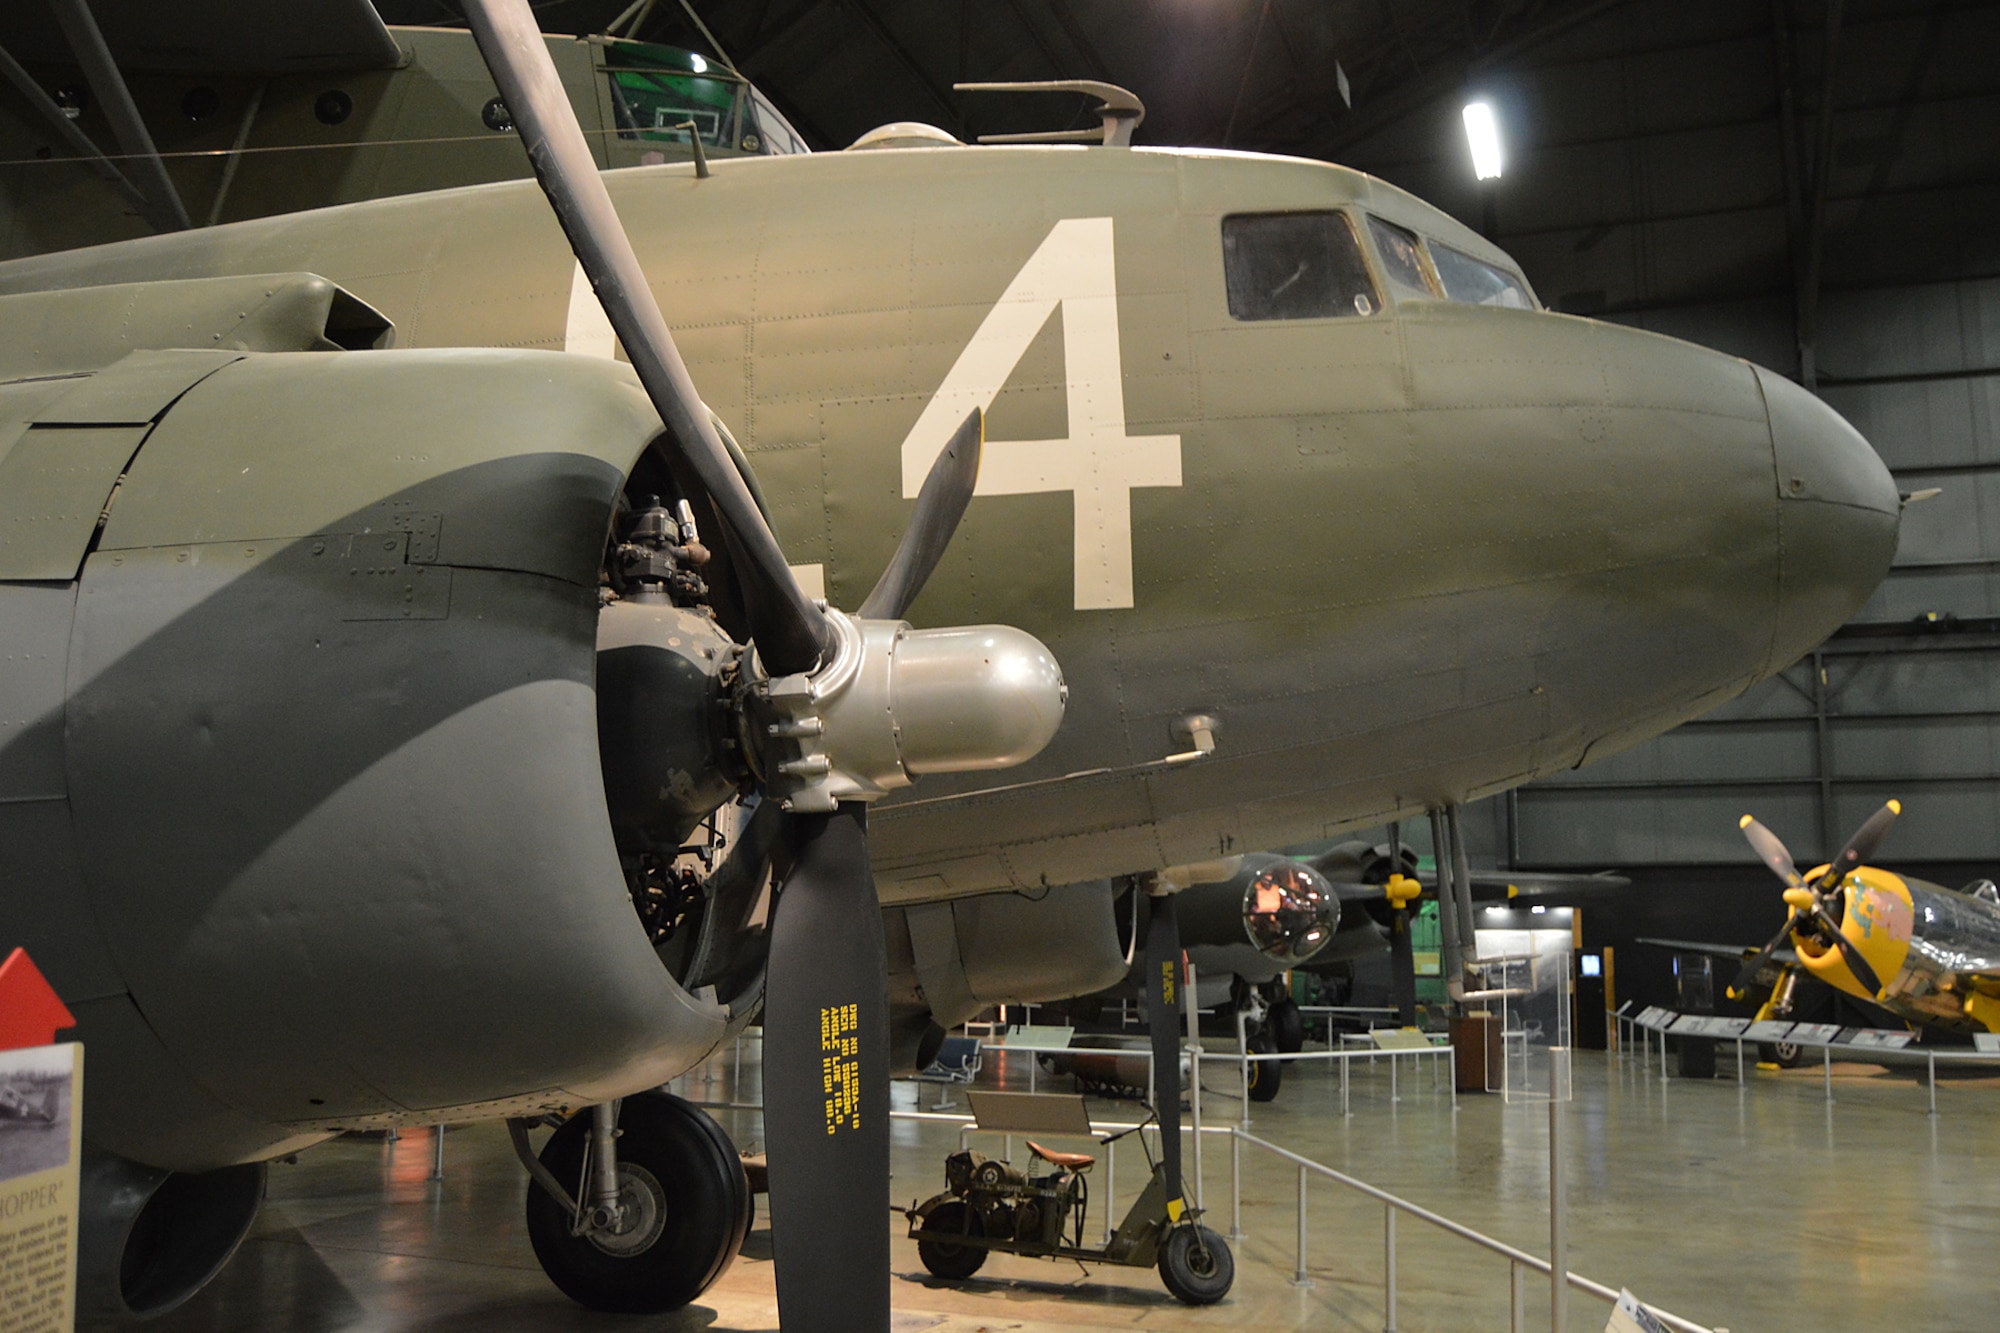 DAYTON, Ohio -- Douglas C-47D Skytrain in the World War II Gallery at the National Museum of the United States Air Force. (U.S. Air Force photo)
